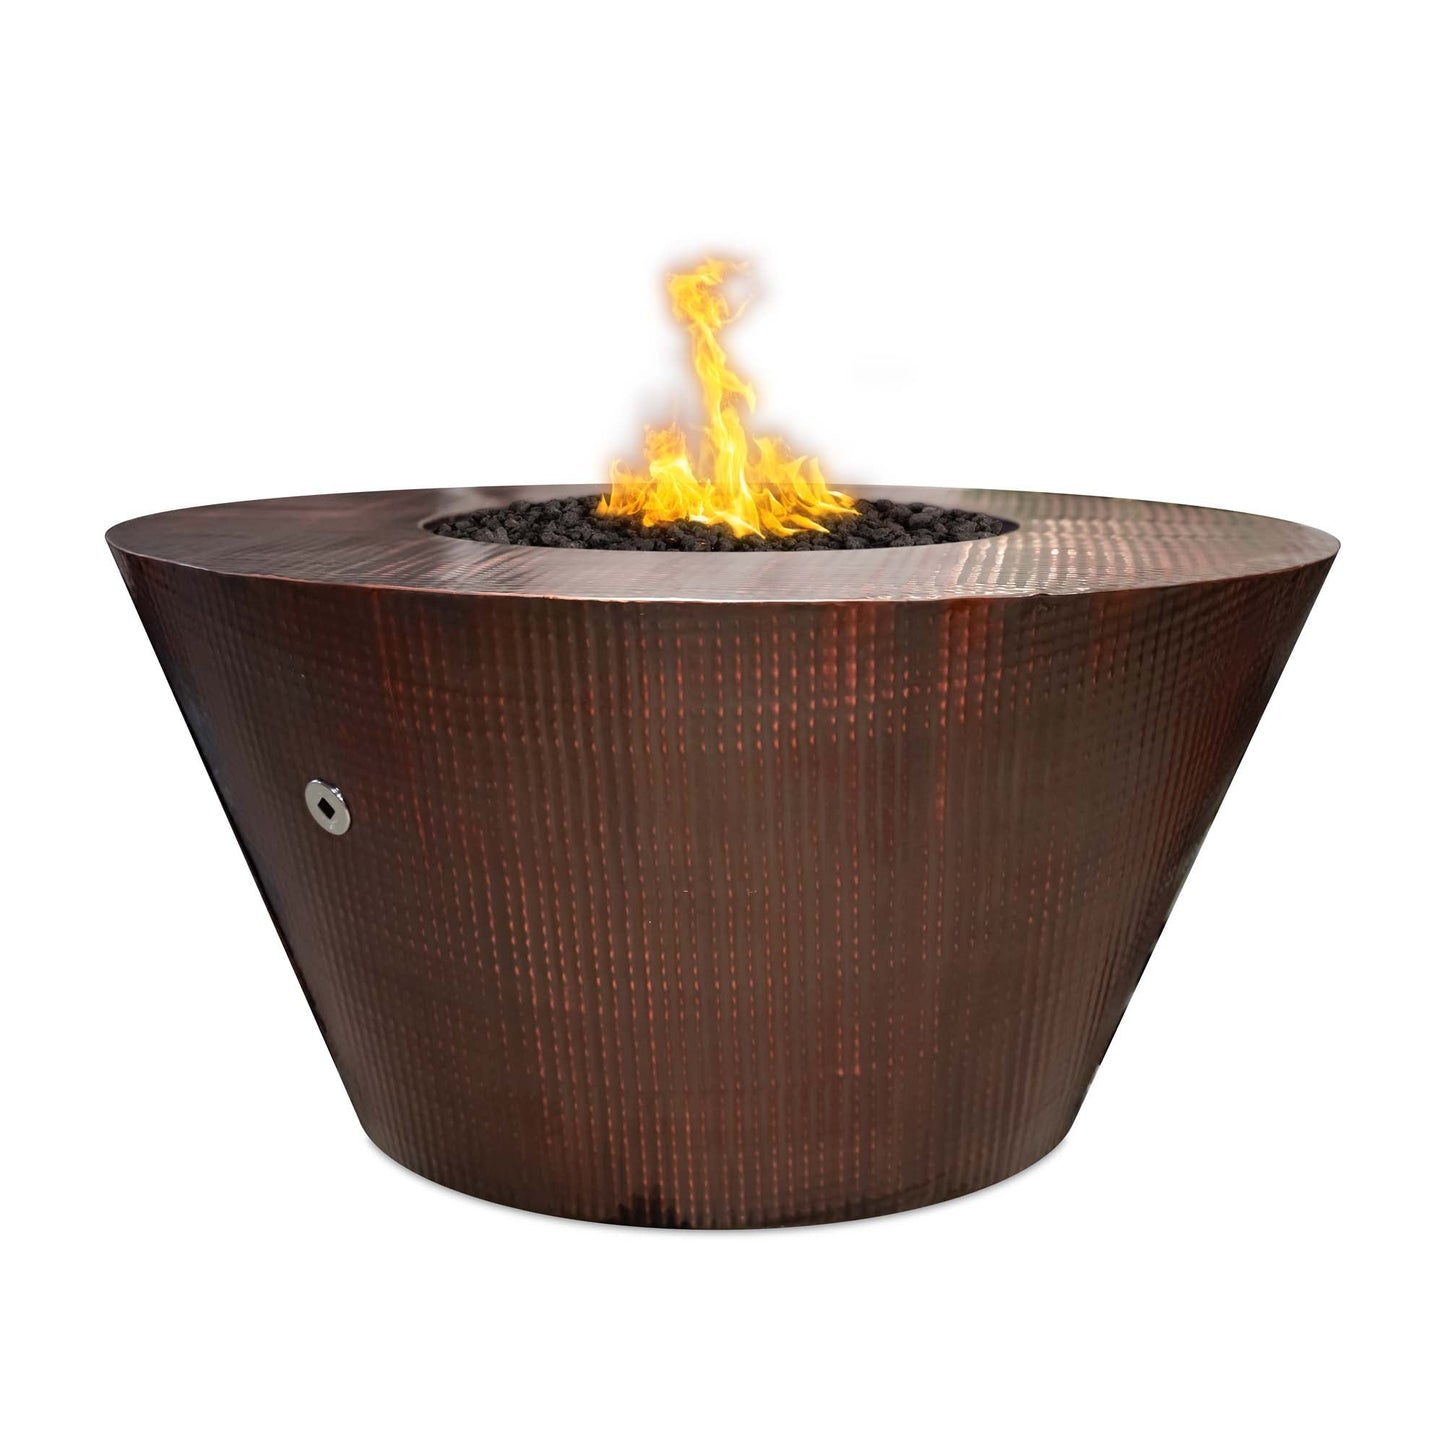 The Outdoor Plus Round Martillo 48" Pewter Powder Coated Metal Liquid Propane Fire Pit with 110V Electronic Ignition